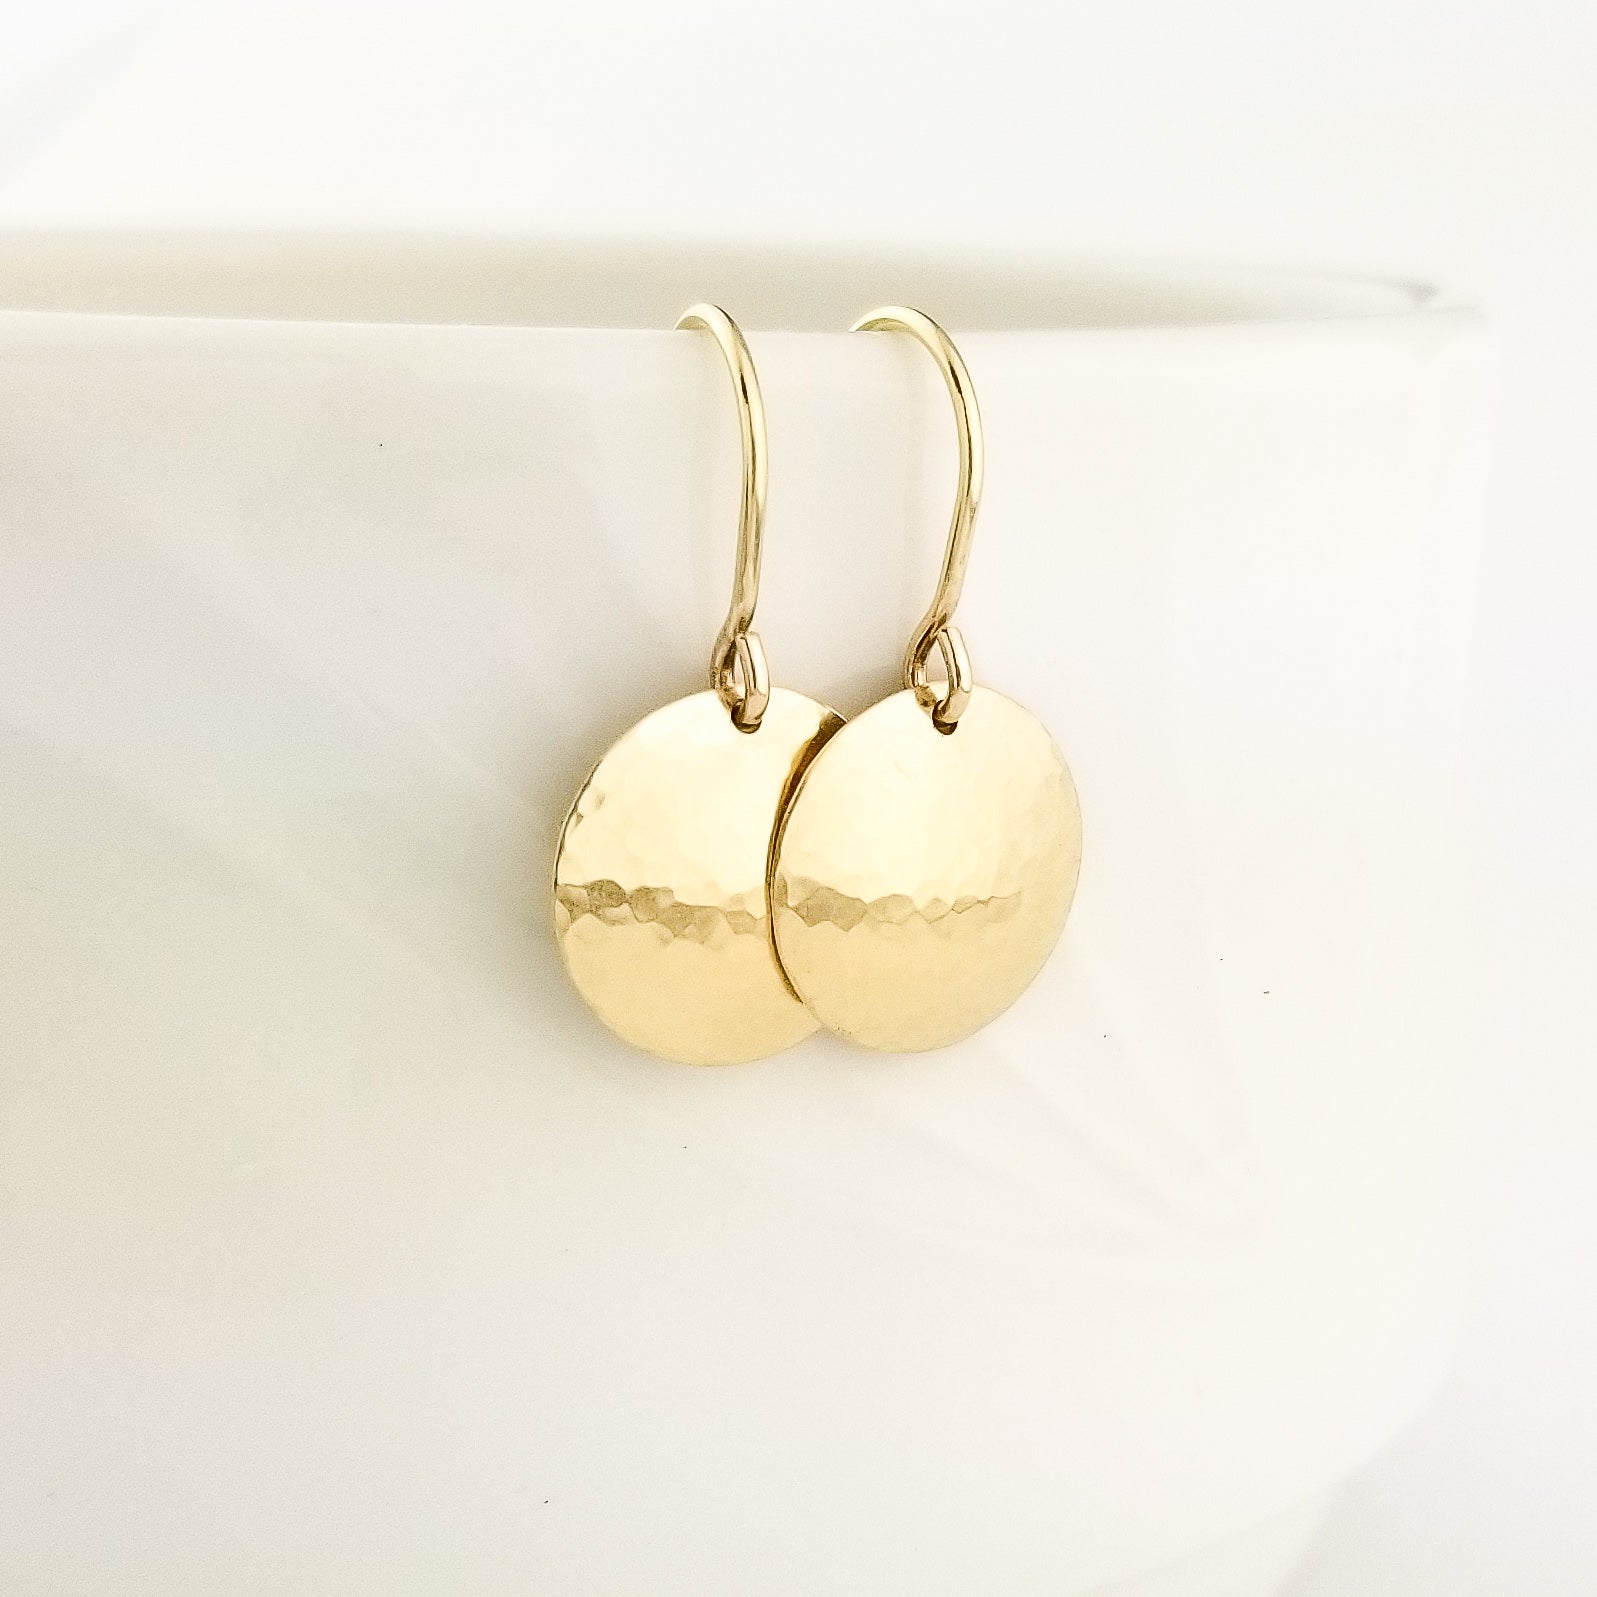 Hammered Domed Disc Earrings Solid 14 Karat Yellow Gold with 14 Karat Ear Wire Held in Hand